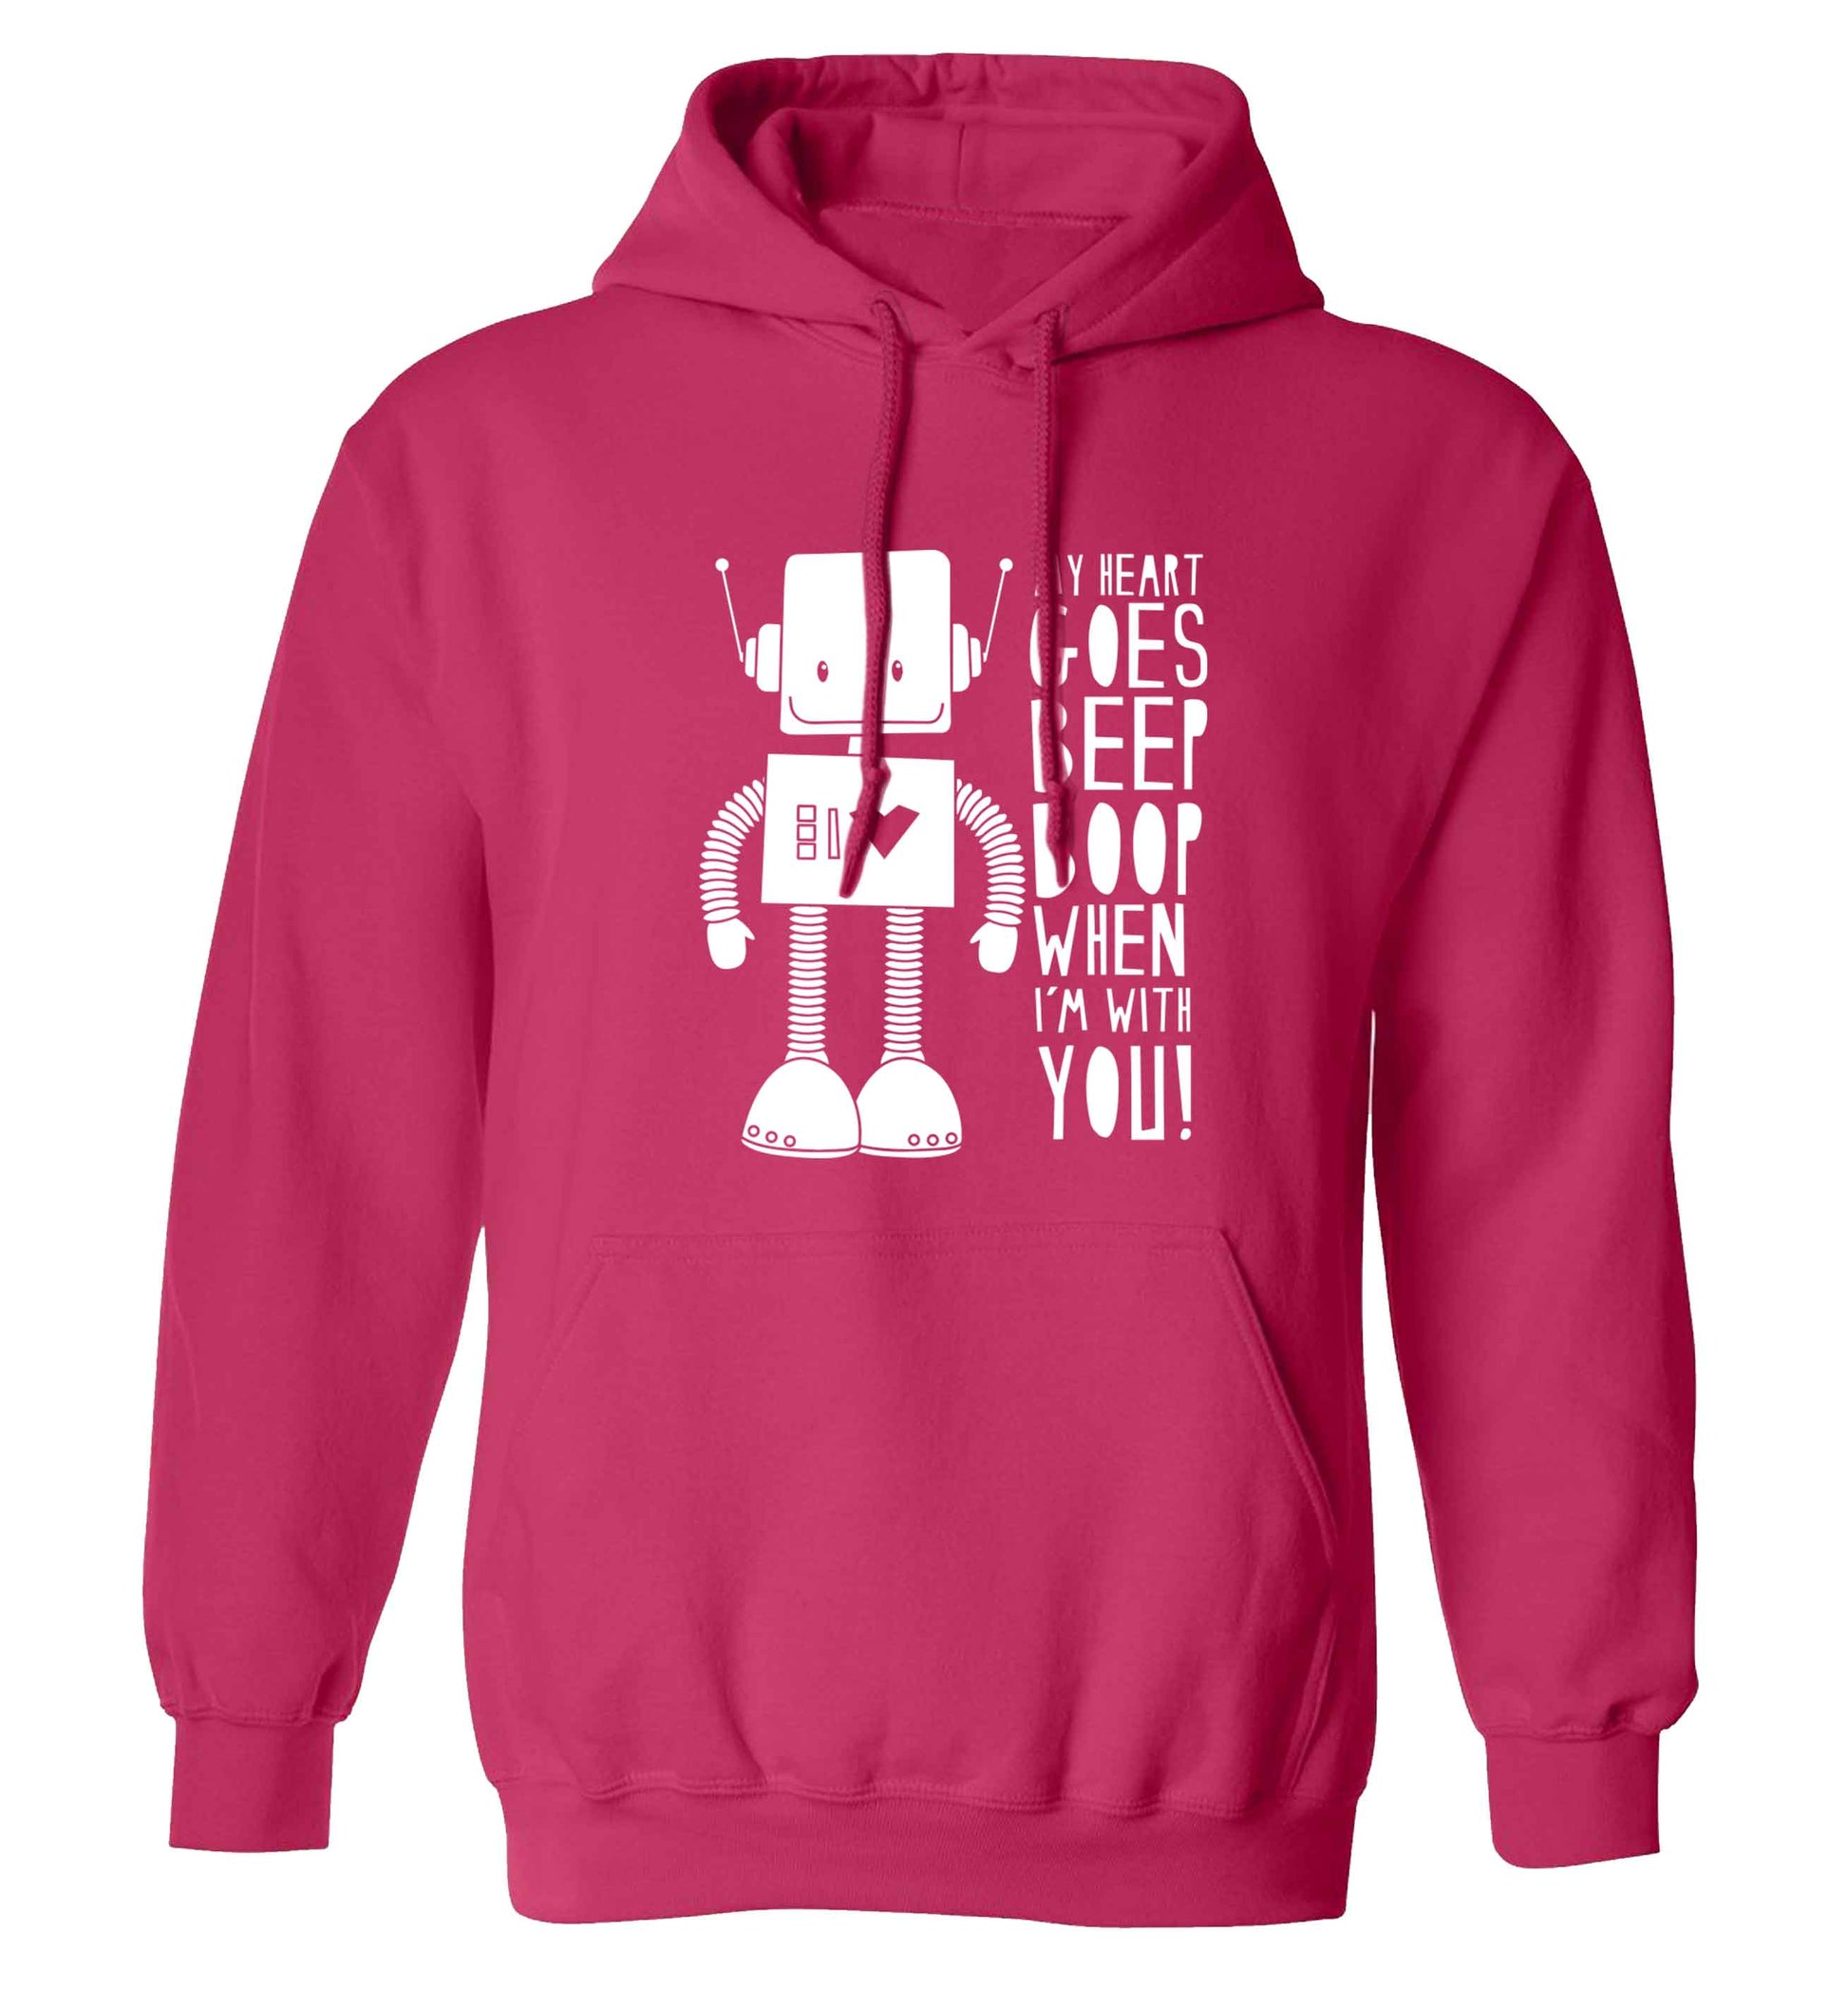 My heart goes beep boop when I'm with you adults unisex pink hoodie 2XL